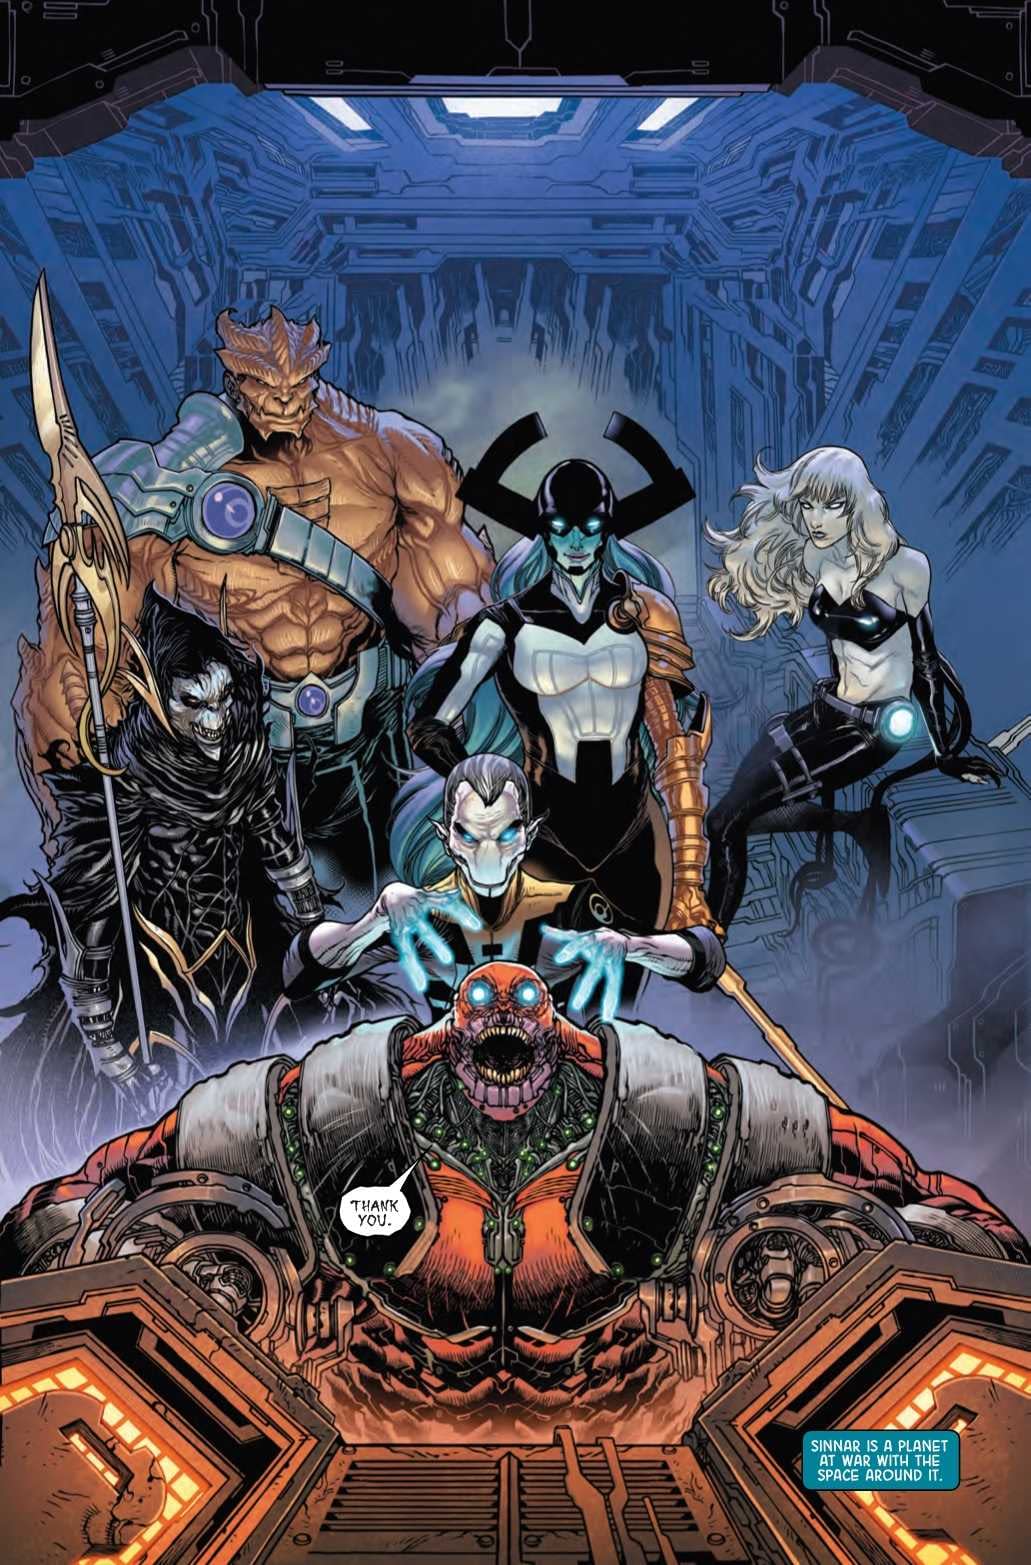 Proxima Midnight's Tips for a Happy and Healthy Sex Life in Next Week's Black Order #2